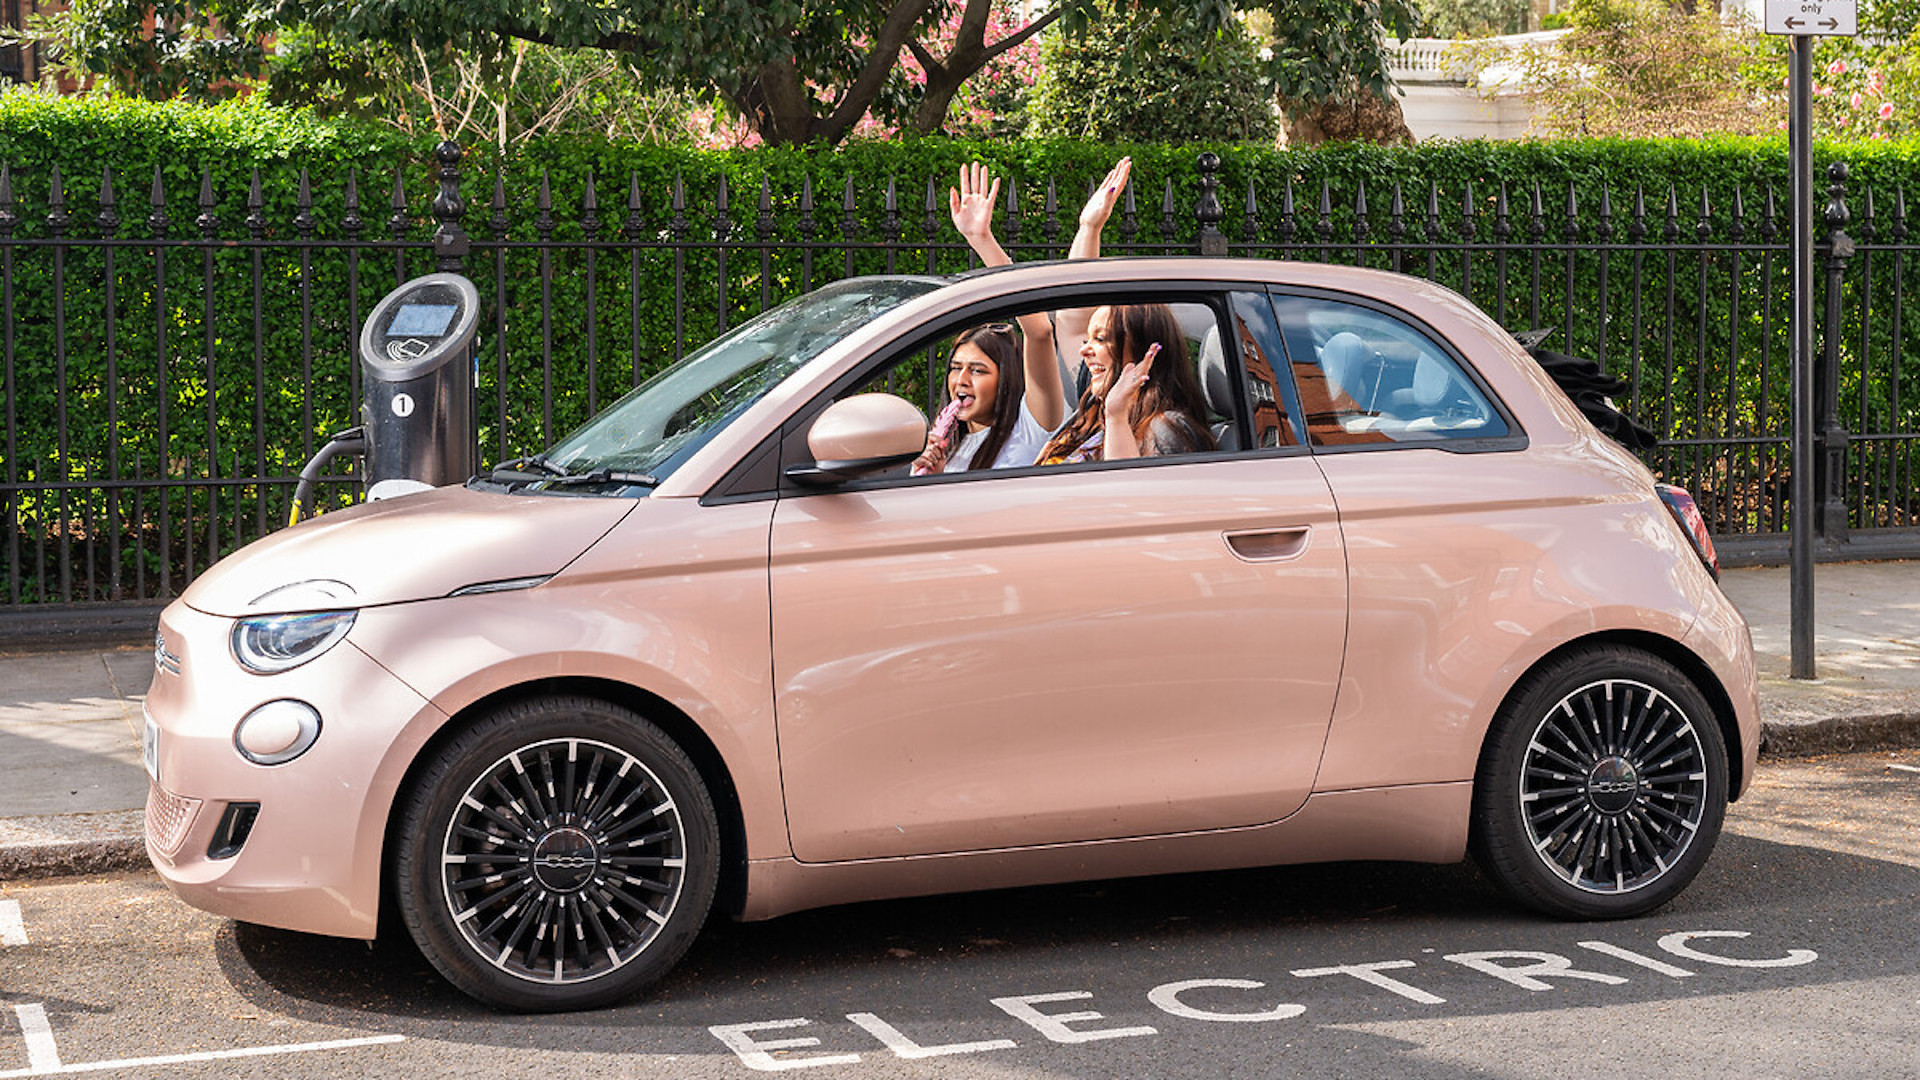 Three quarters of Brits sing in the car according to new Fiat study